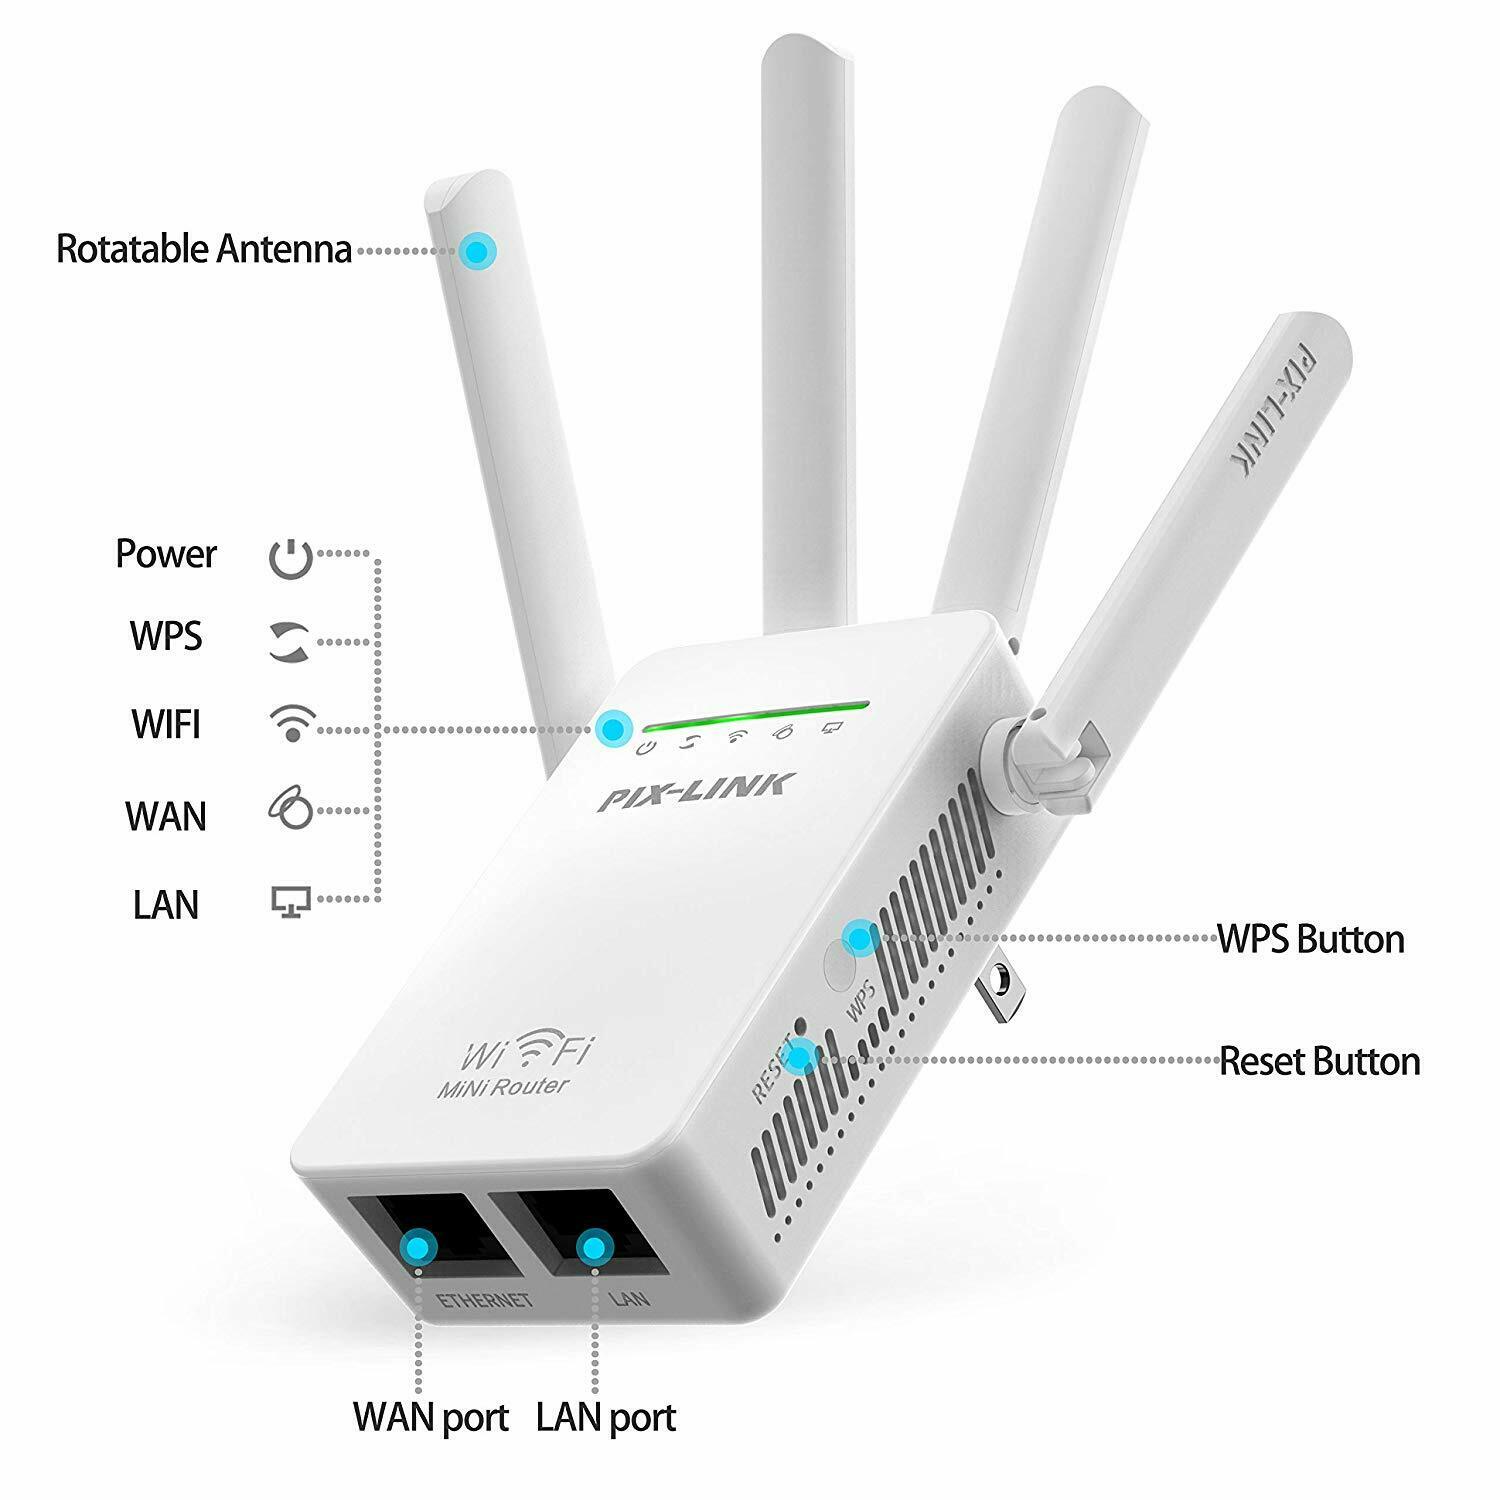 PIXLINK 300Mbps Wireless Routers WiFi Signal Repeater Extender/AP/Router Mode Mini Home Long Rang 4 External Antennas Easy Setup